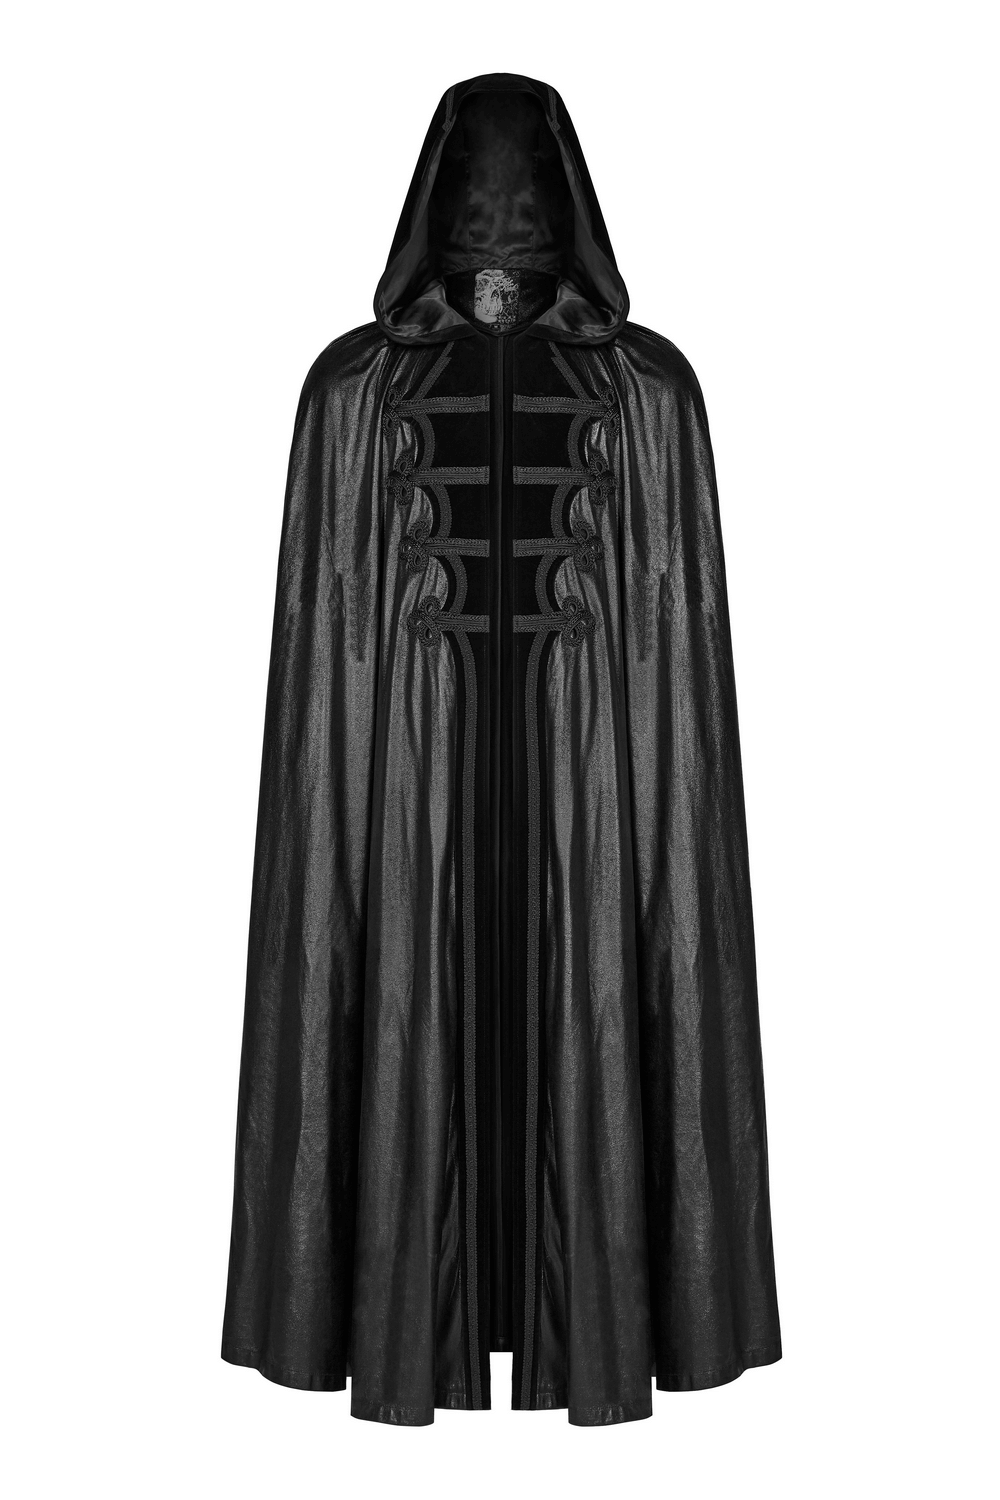 Hooded Longline Black Cloak for Themed Events and Cosplay - HARD'N'HEAVY